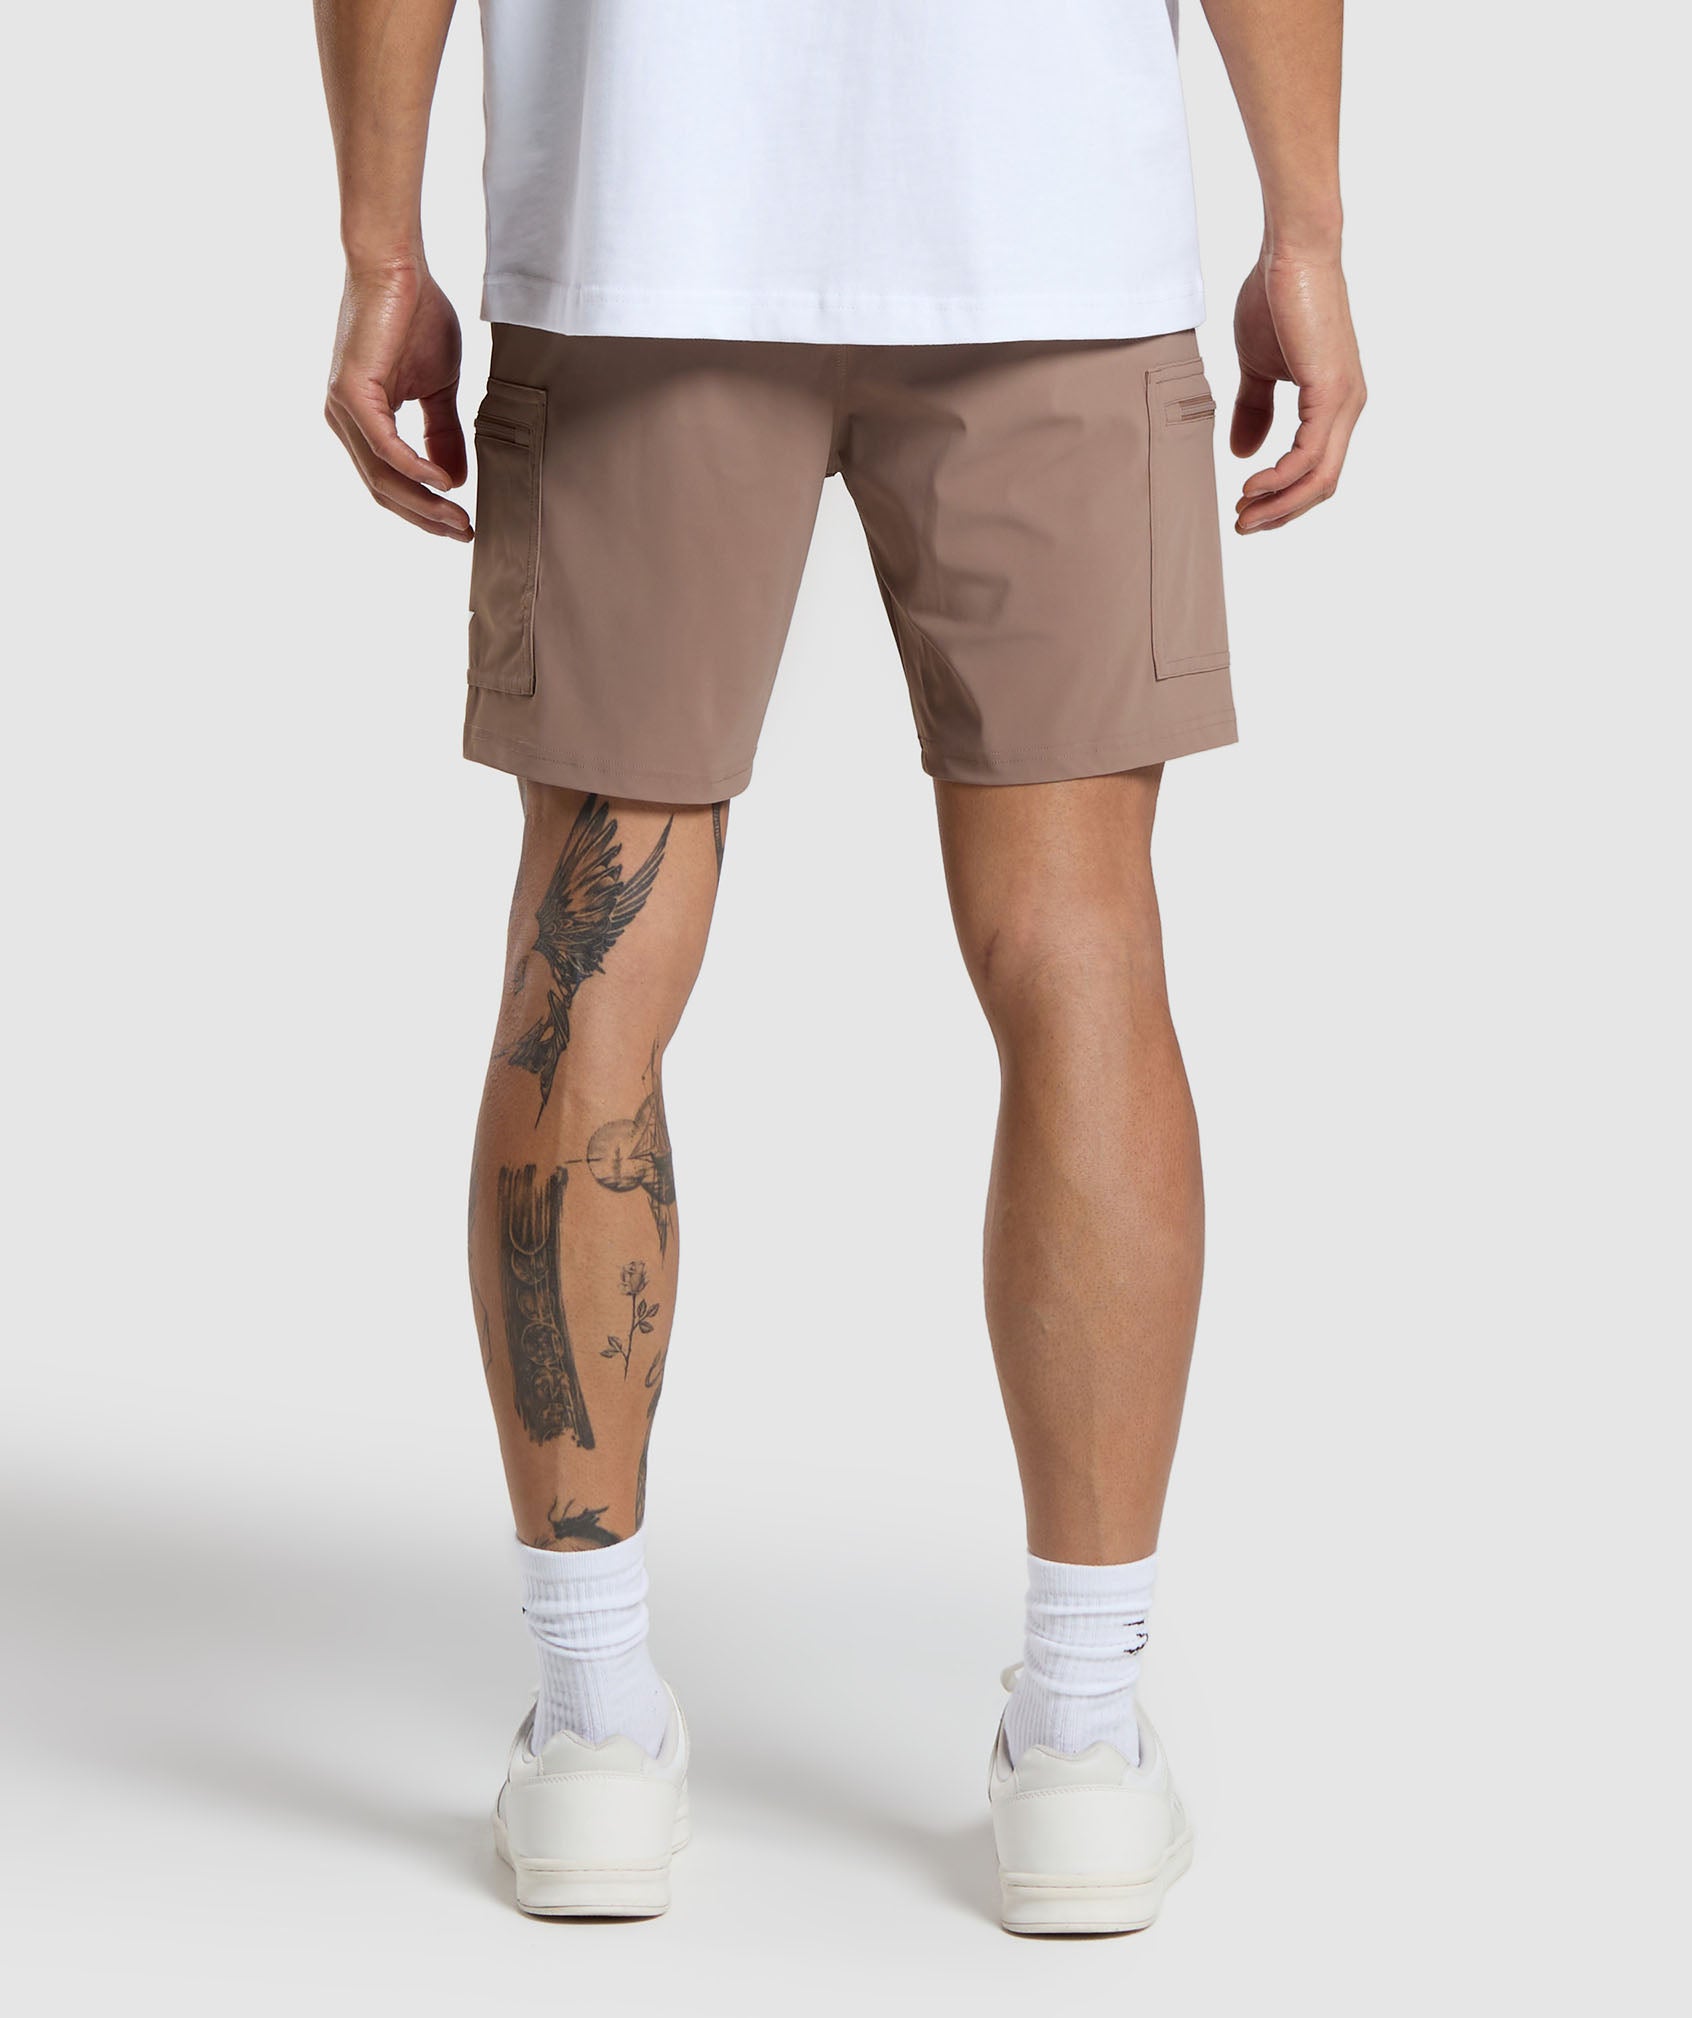 Rest Day 6" Cargo Shorts in Mocha Mauve - view 2